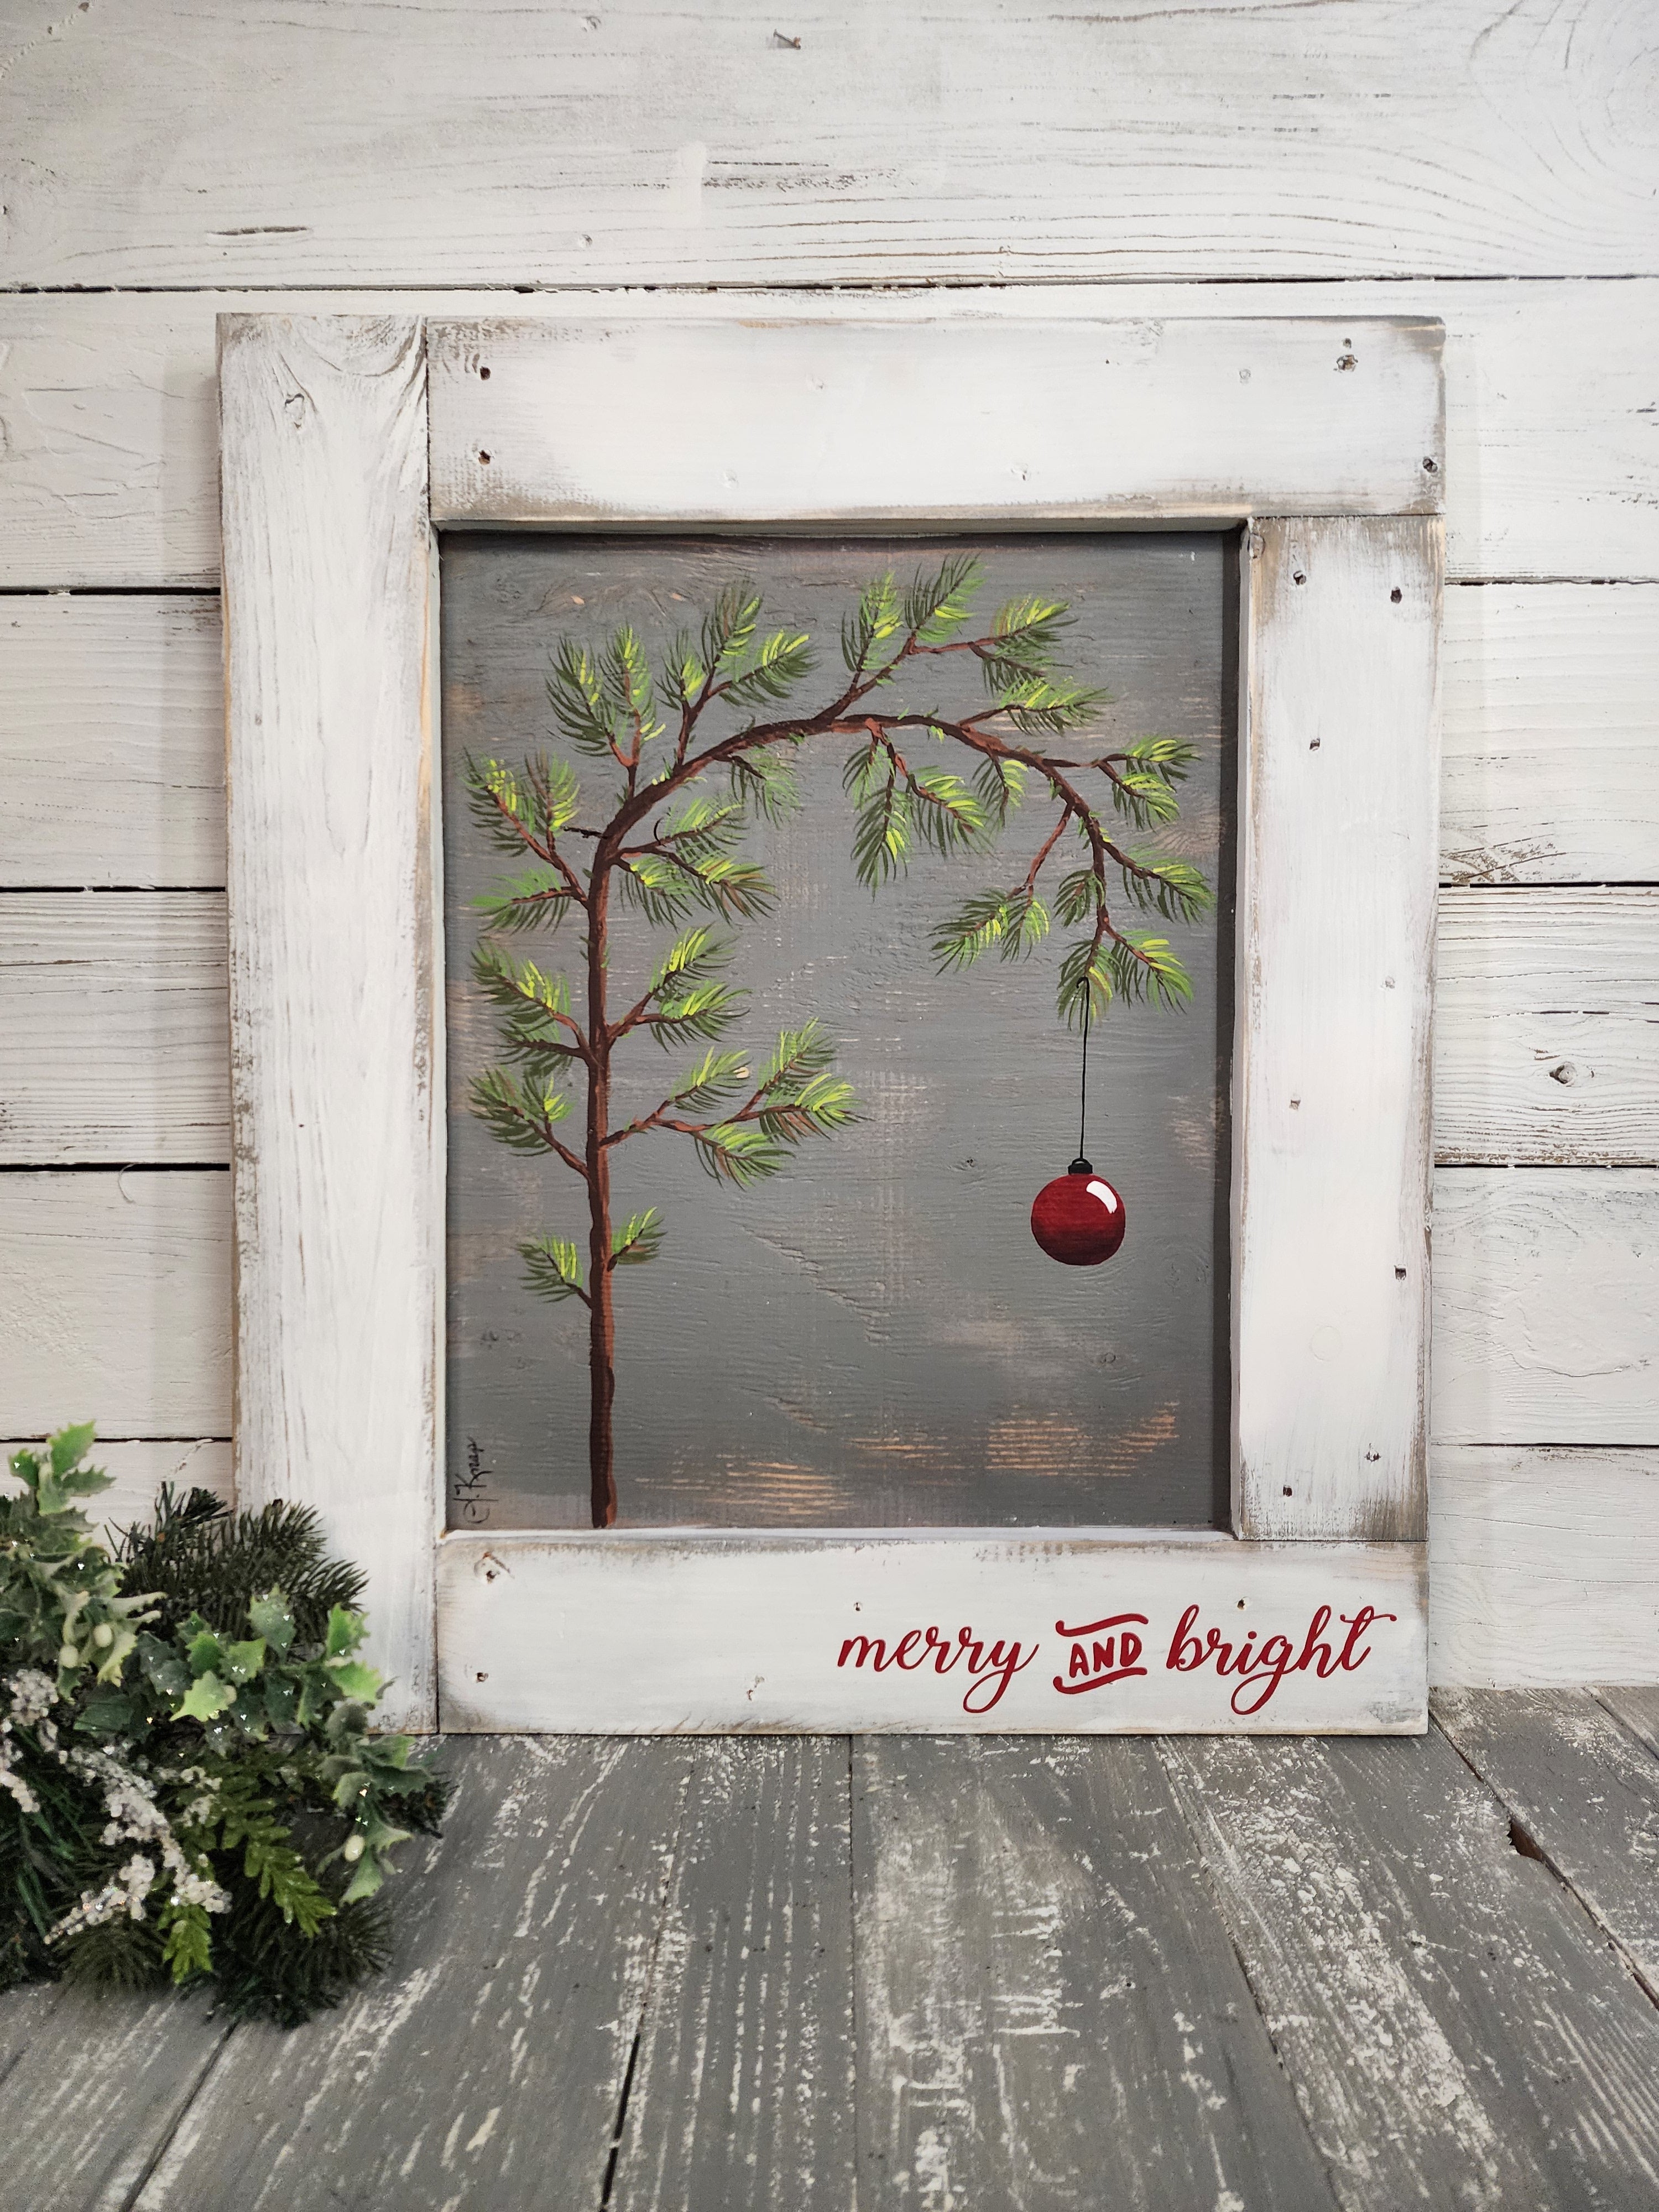 Hand painted Charlie B Christmas tree on recycled pallet wood, Red "Merry and Bright" word sign, classic red Christmas bulb, white frame